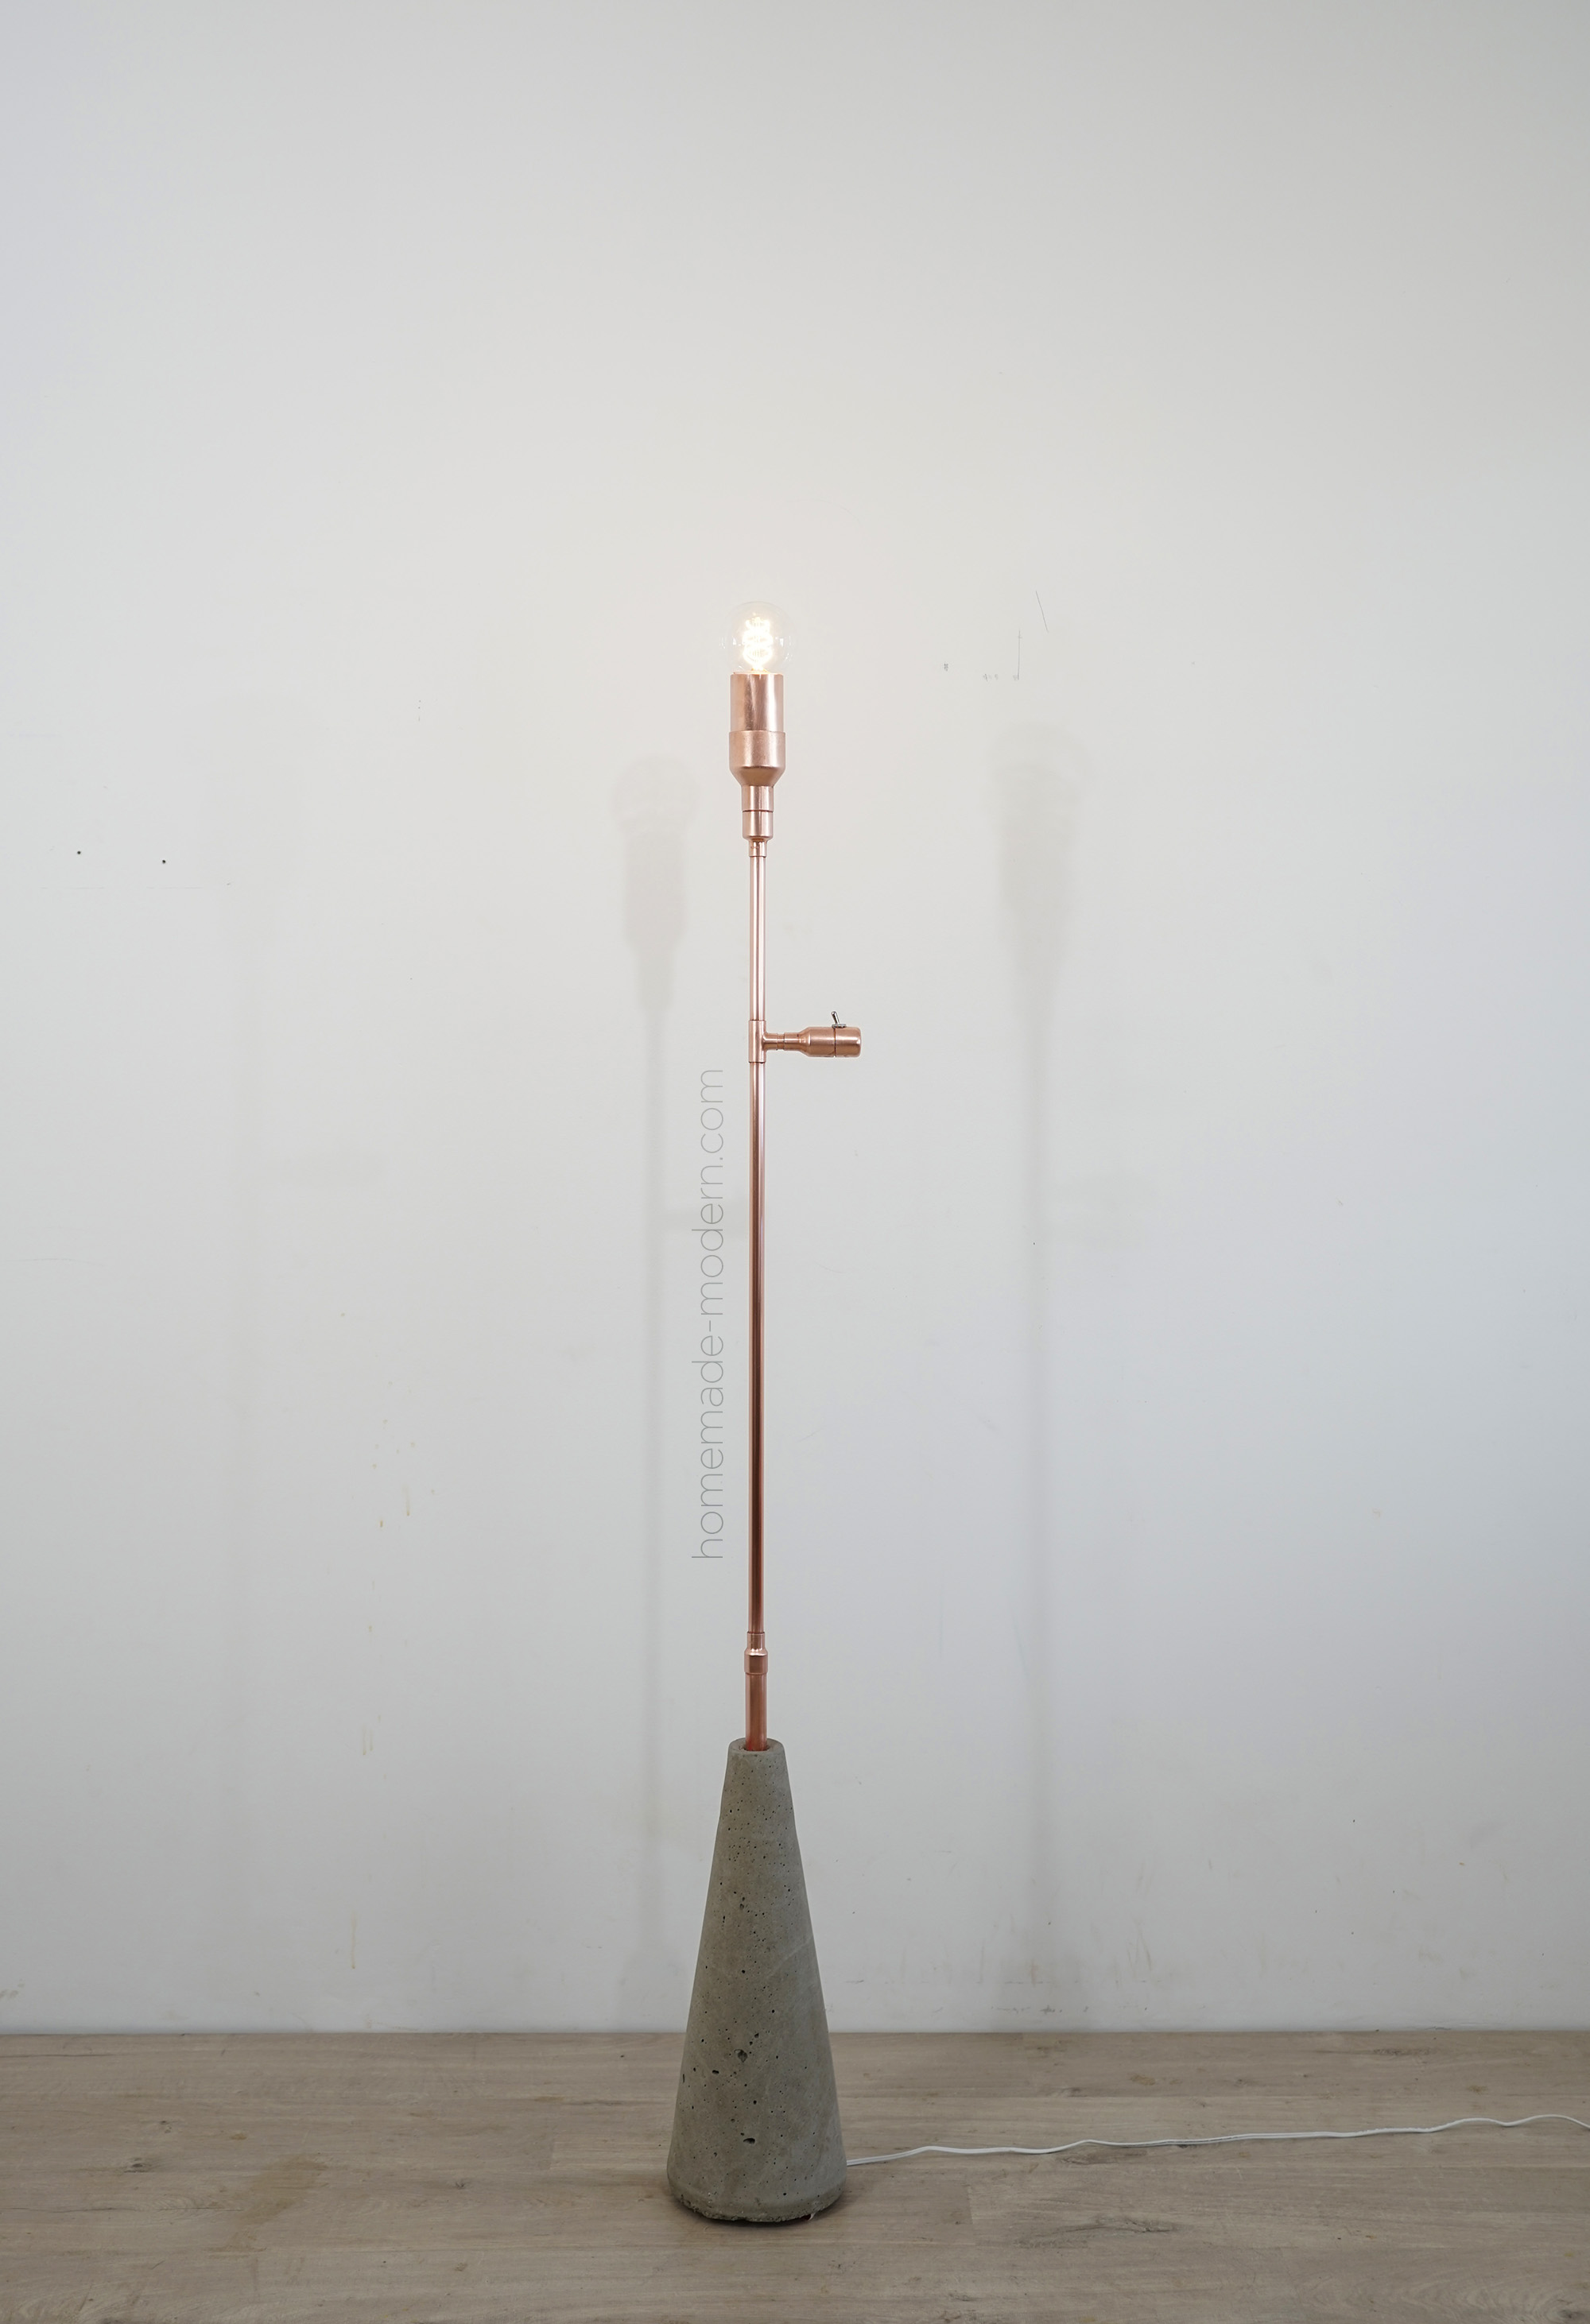 This DIY copper lamp was made out of copper pipes from Home Depot. For more information go to HomeMade-Modern.com